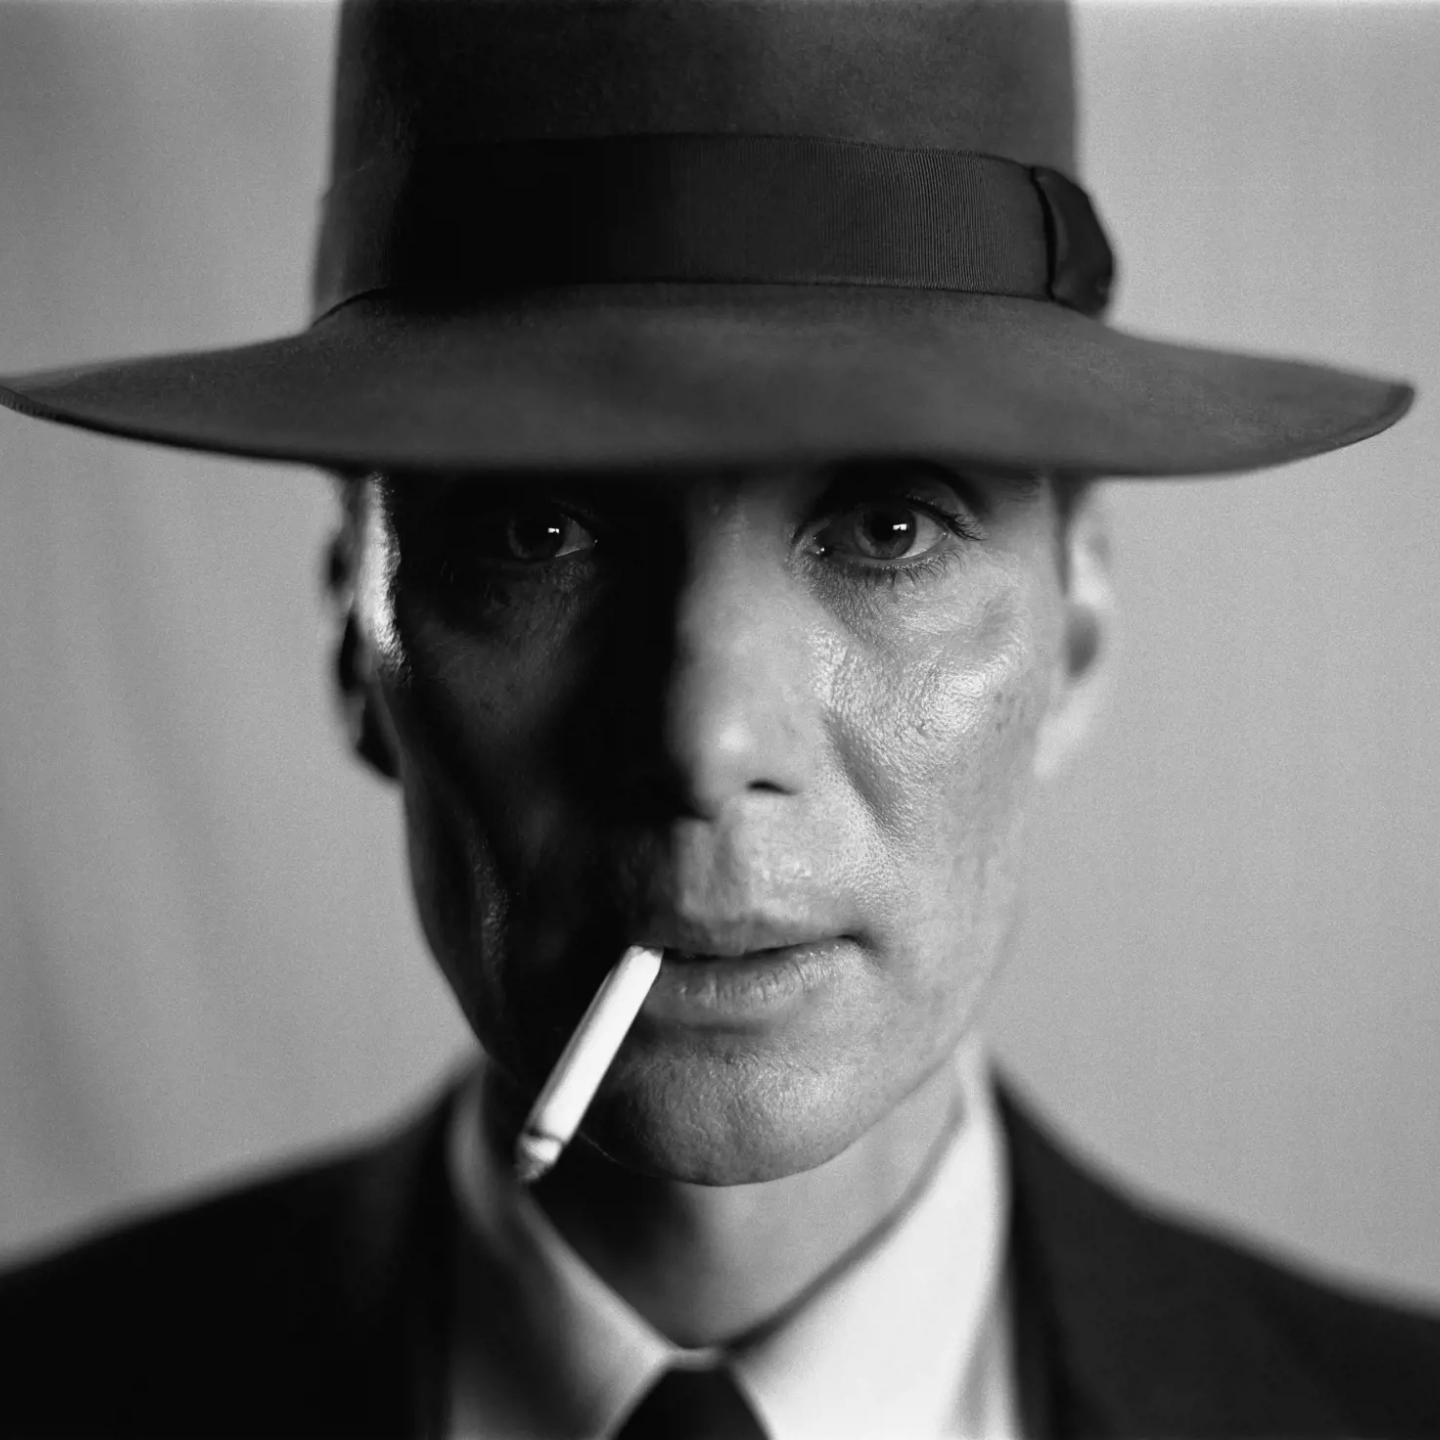 a man wearing a hat and smoking a cigarette